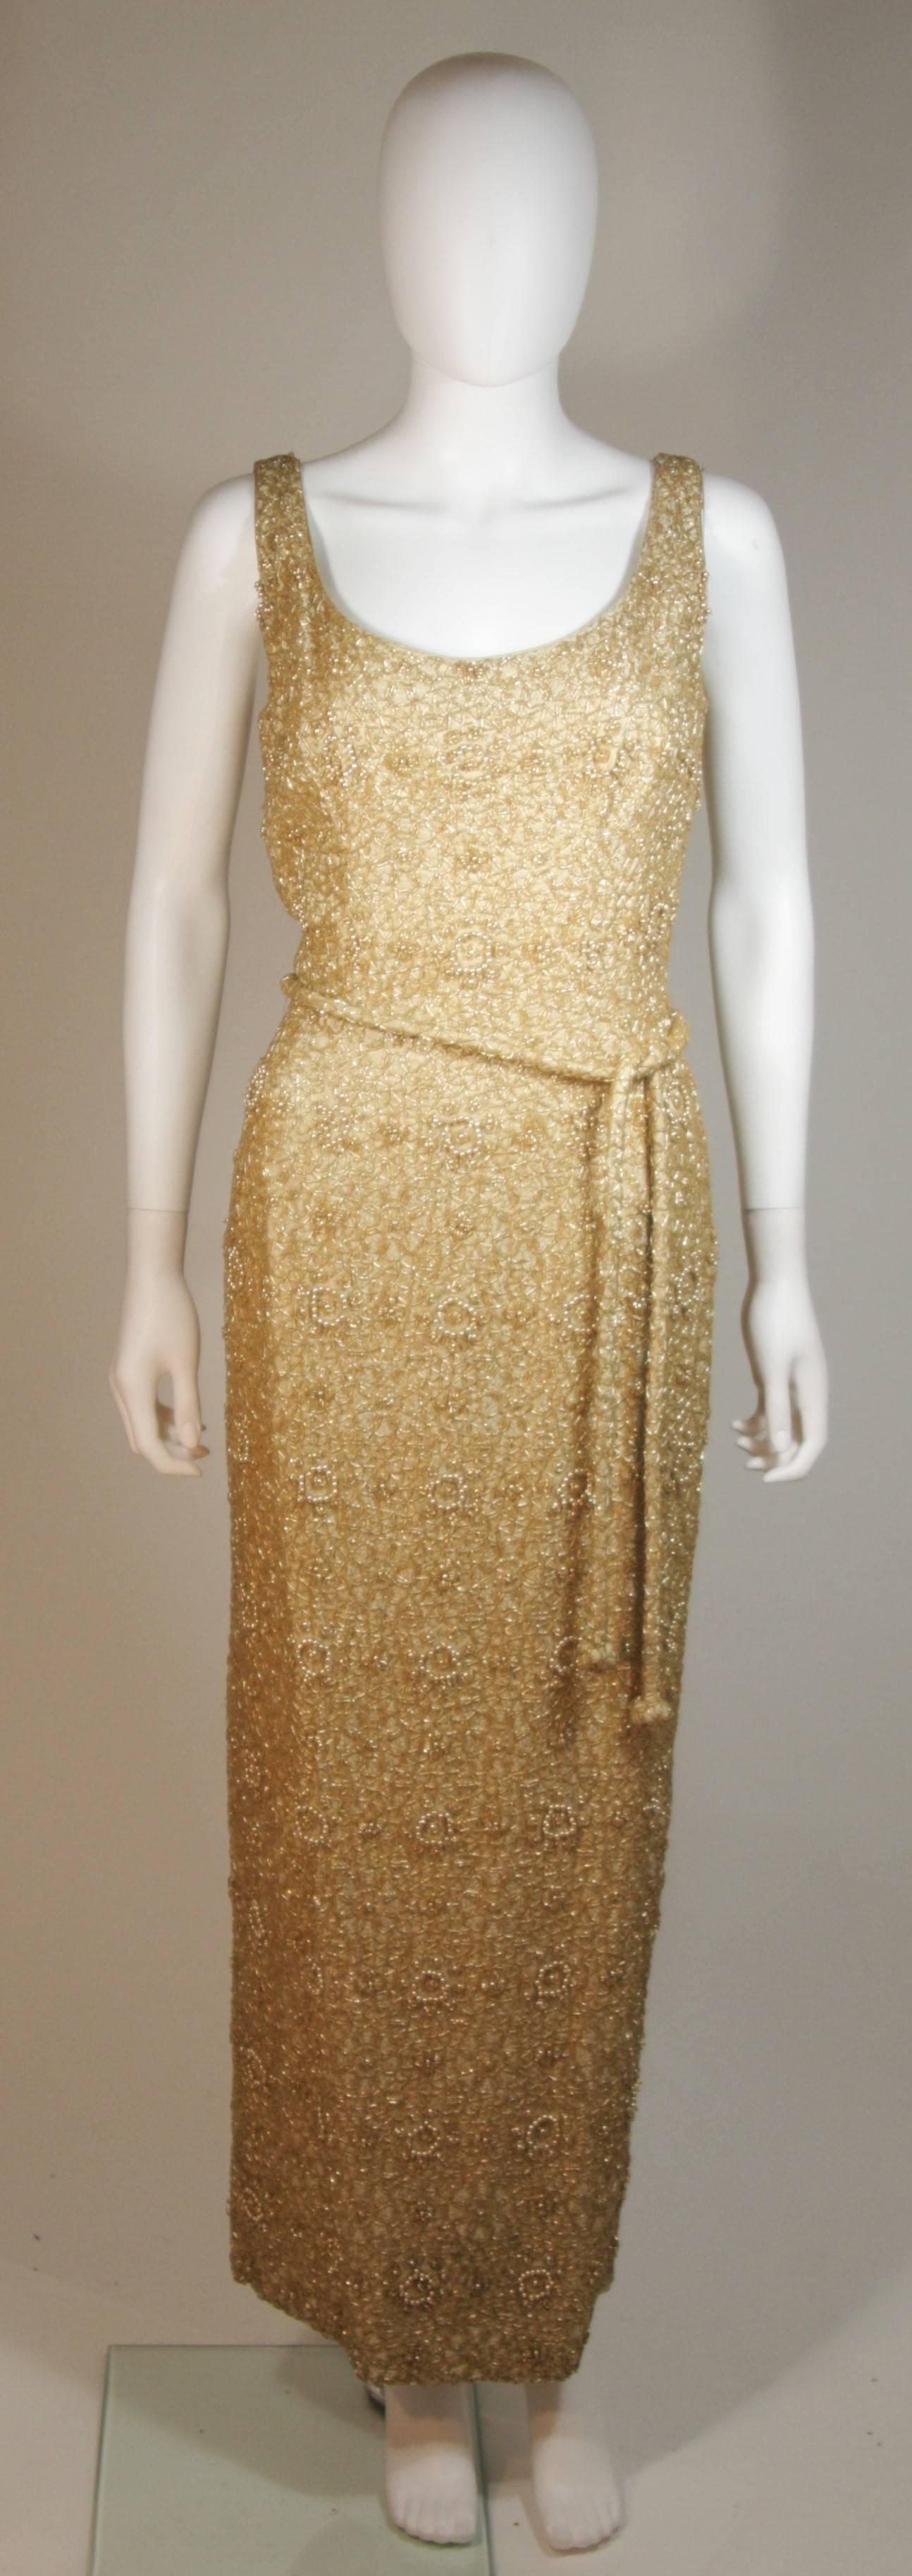 This Haute Couture Int'l  gown is composed of a heavily beaded silk in gold. The dress features a classic style with zipper closure and belt. In excellent vintage condition. Made in Hong Kong.

  **Please cross-reference measurements for personal